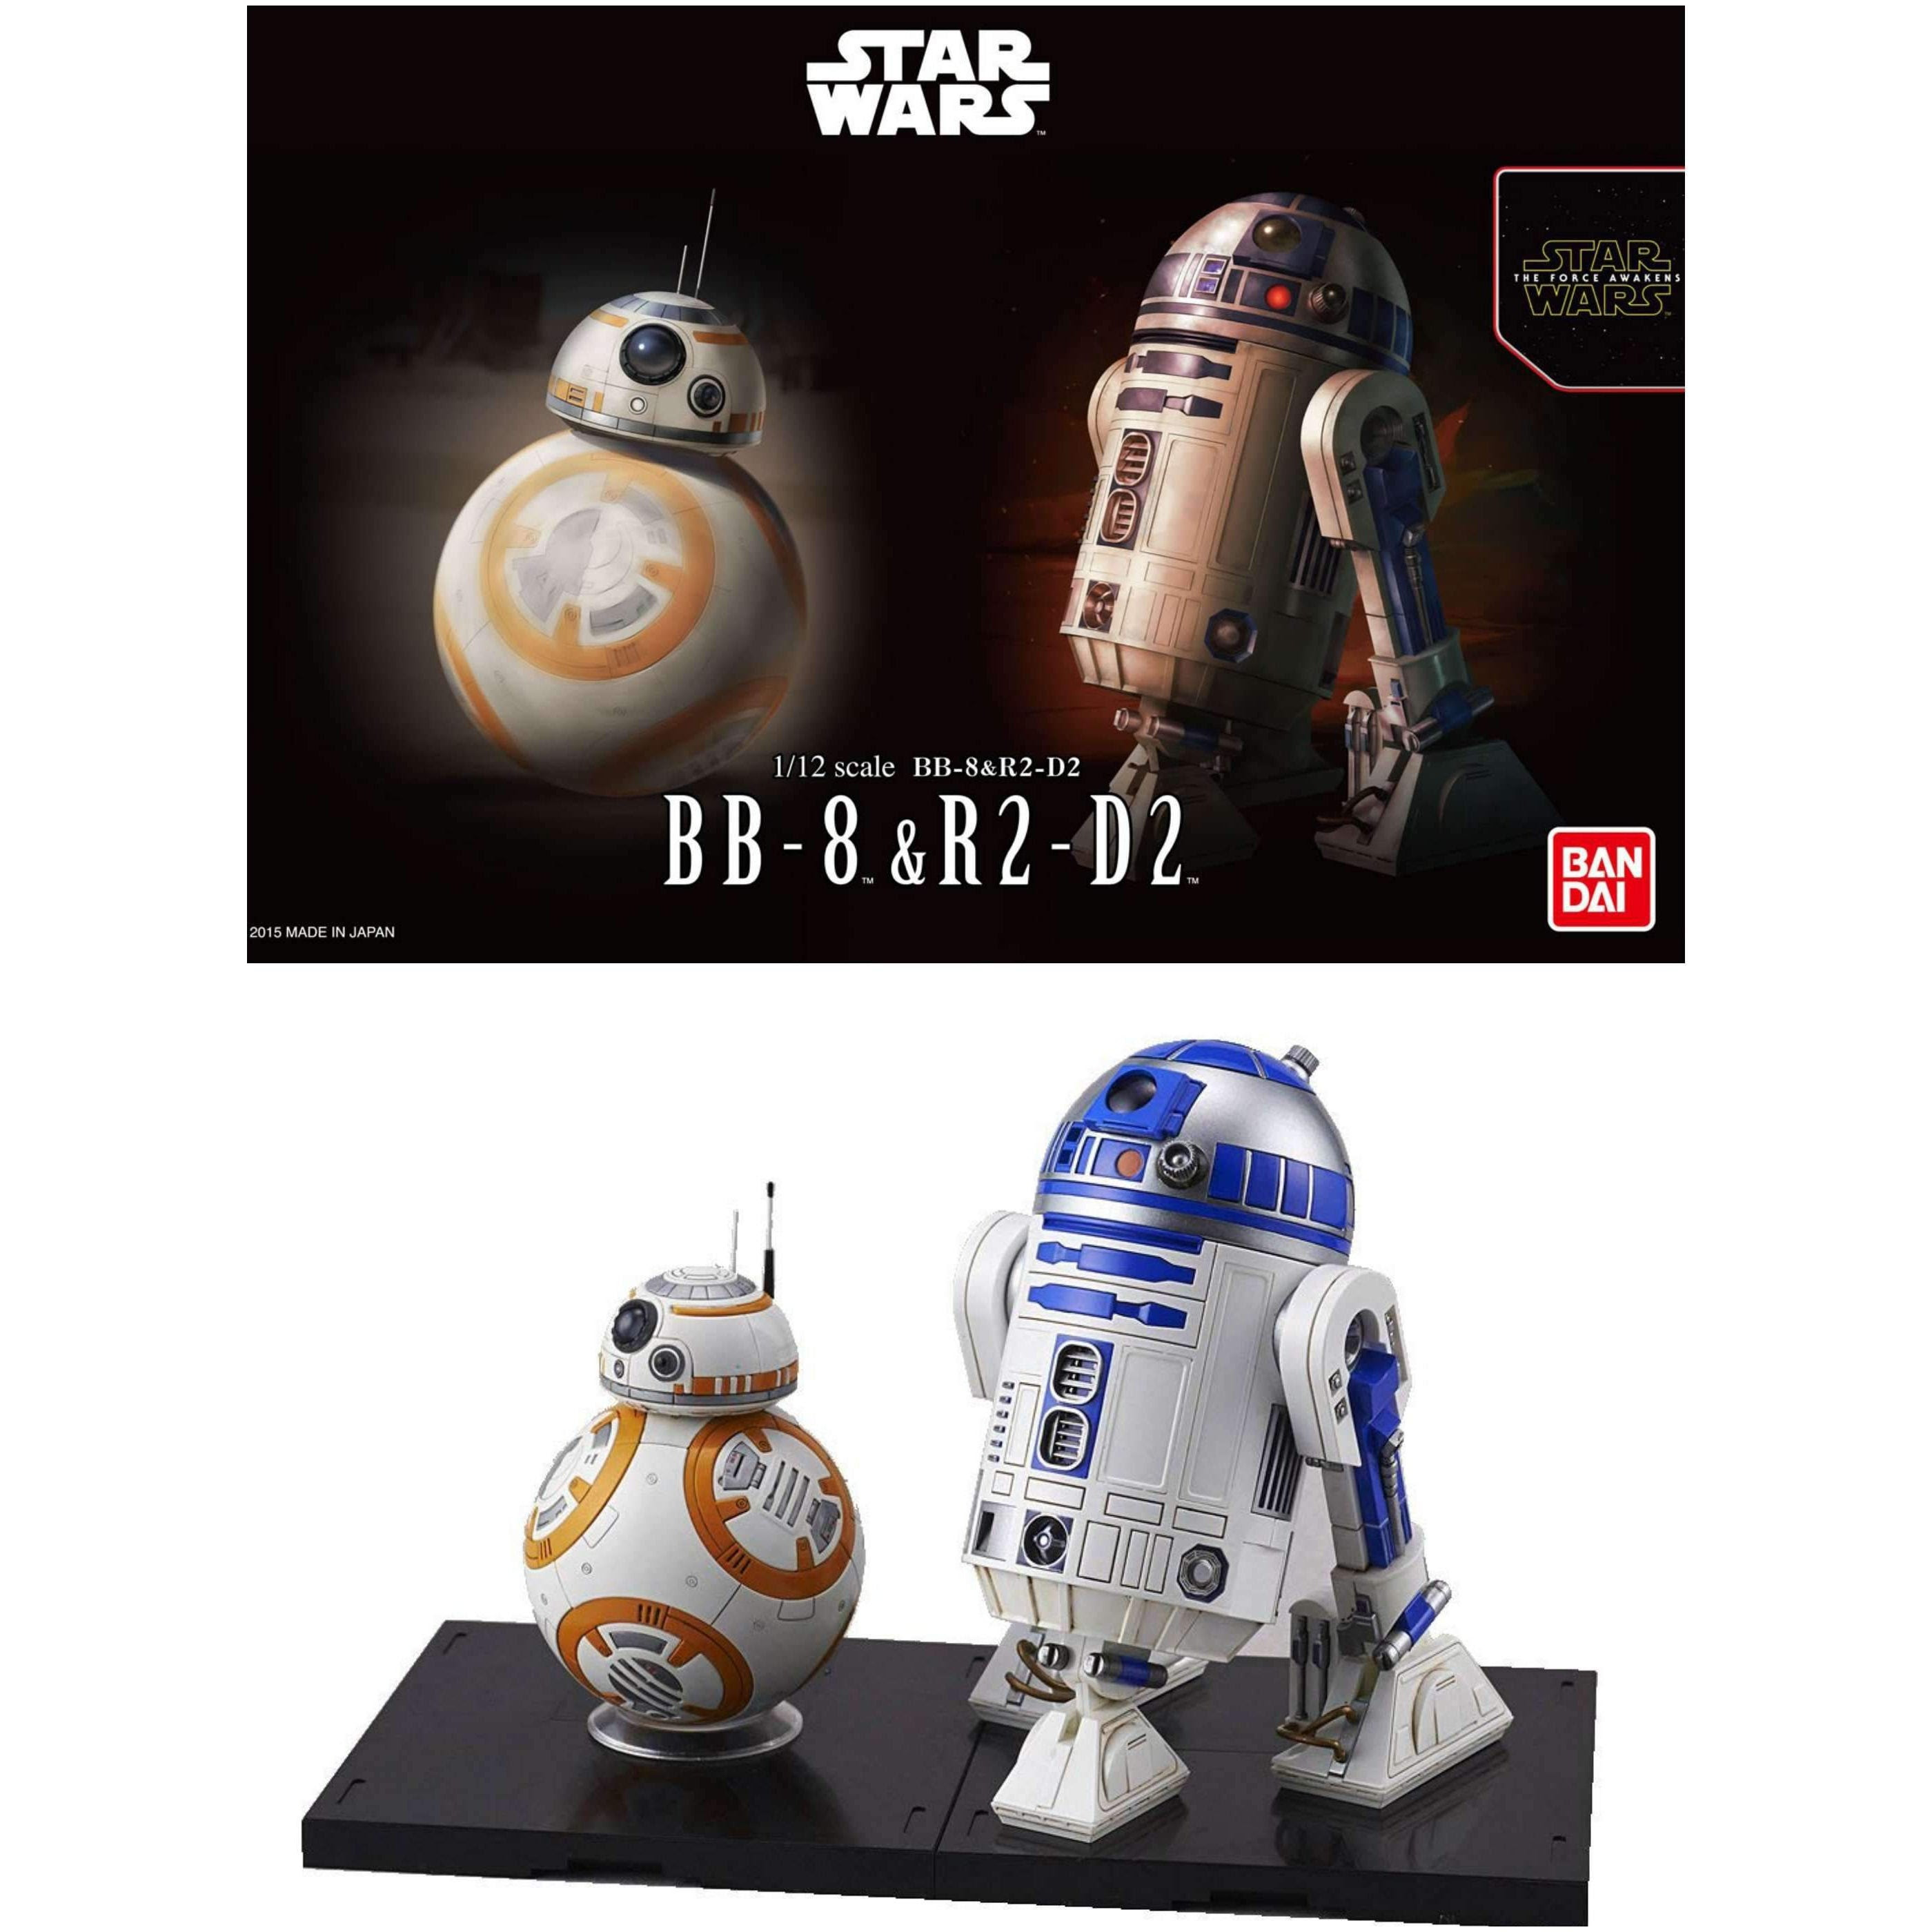 Image of Star Wars BB-8 & R2-D2 1/12 Scale Model